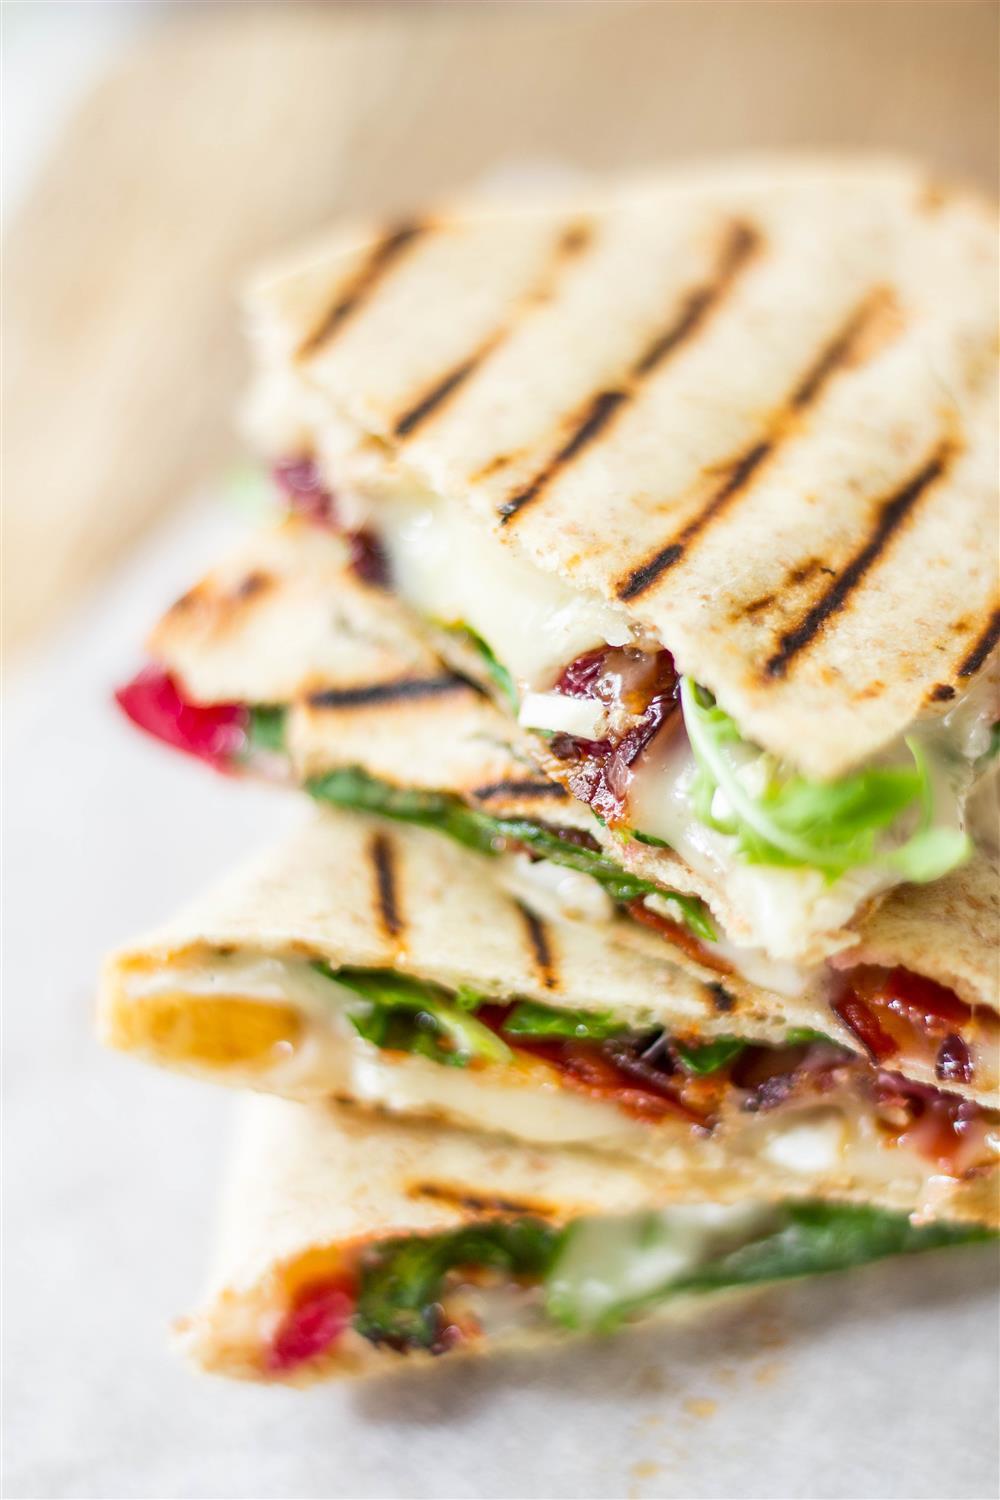 Use Your Noodles - Cherry, Brie & Bacon Grilled Quesadilla